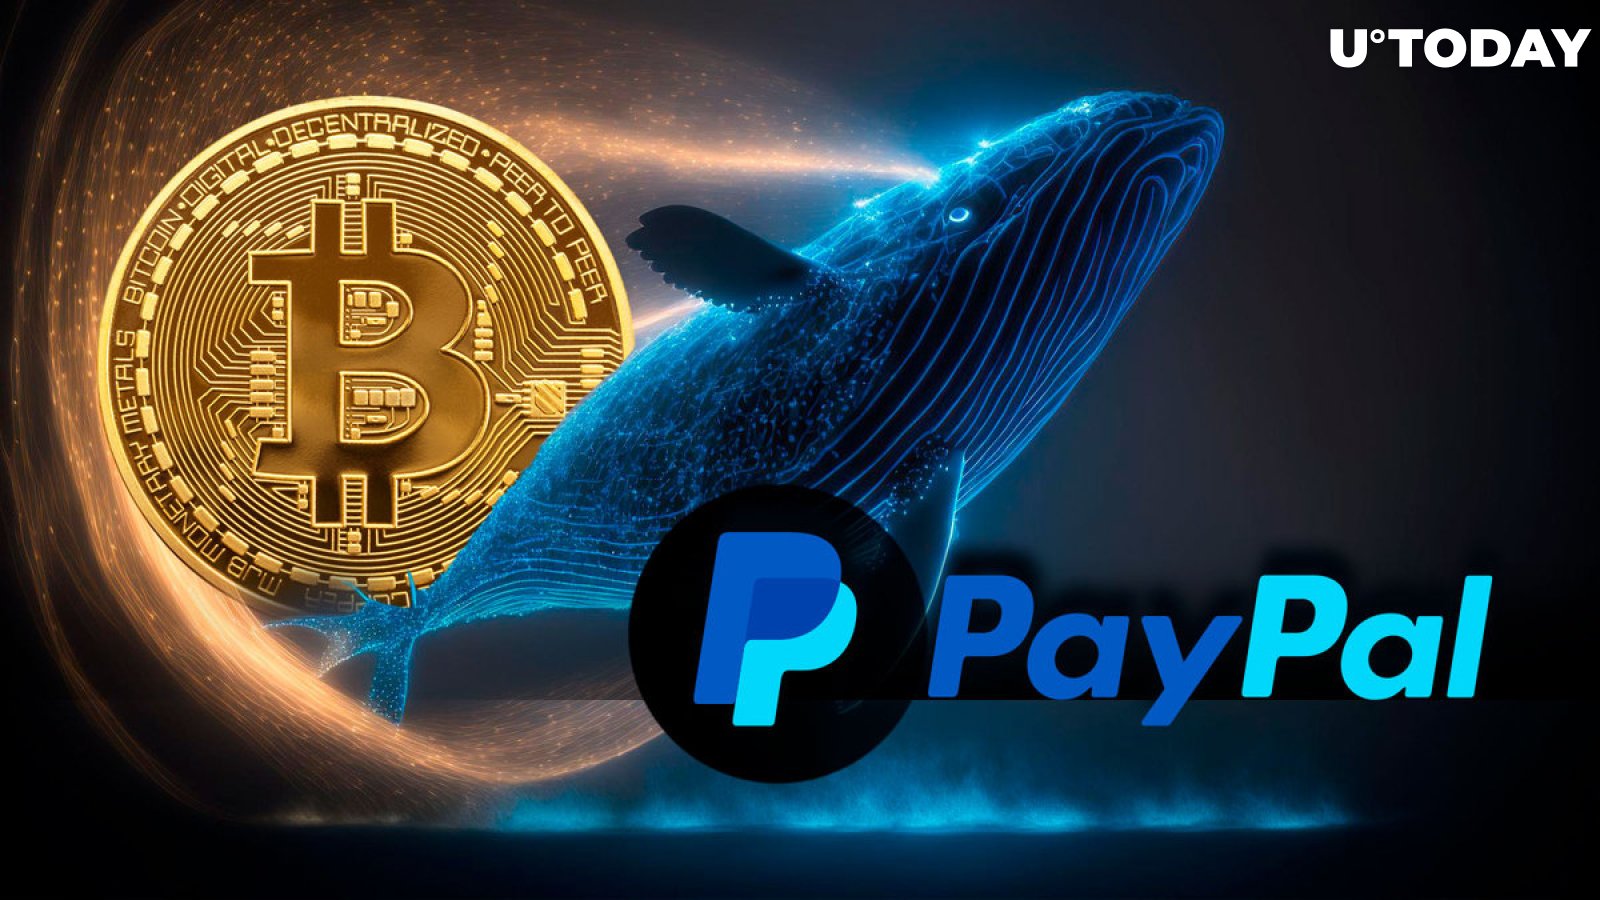 $318 Million in Bitcoin Moved to Paypal by Anon Whale: Details